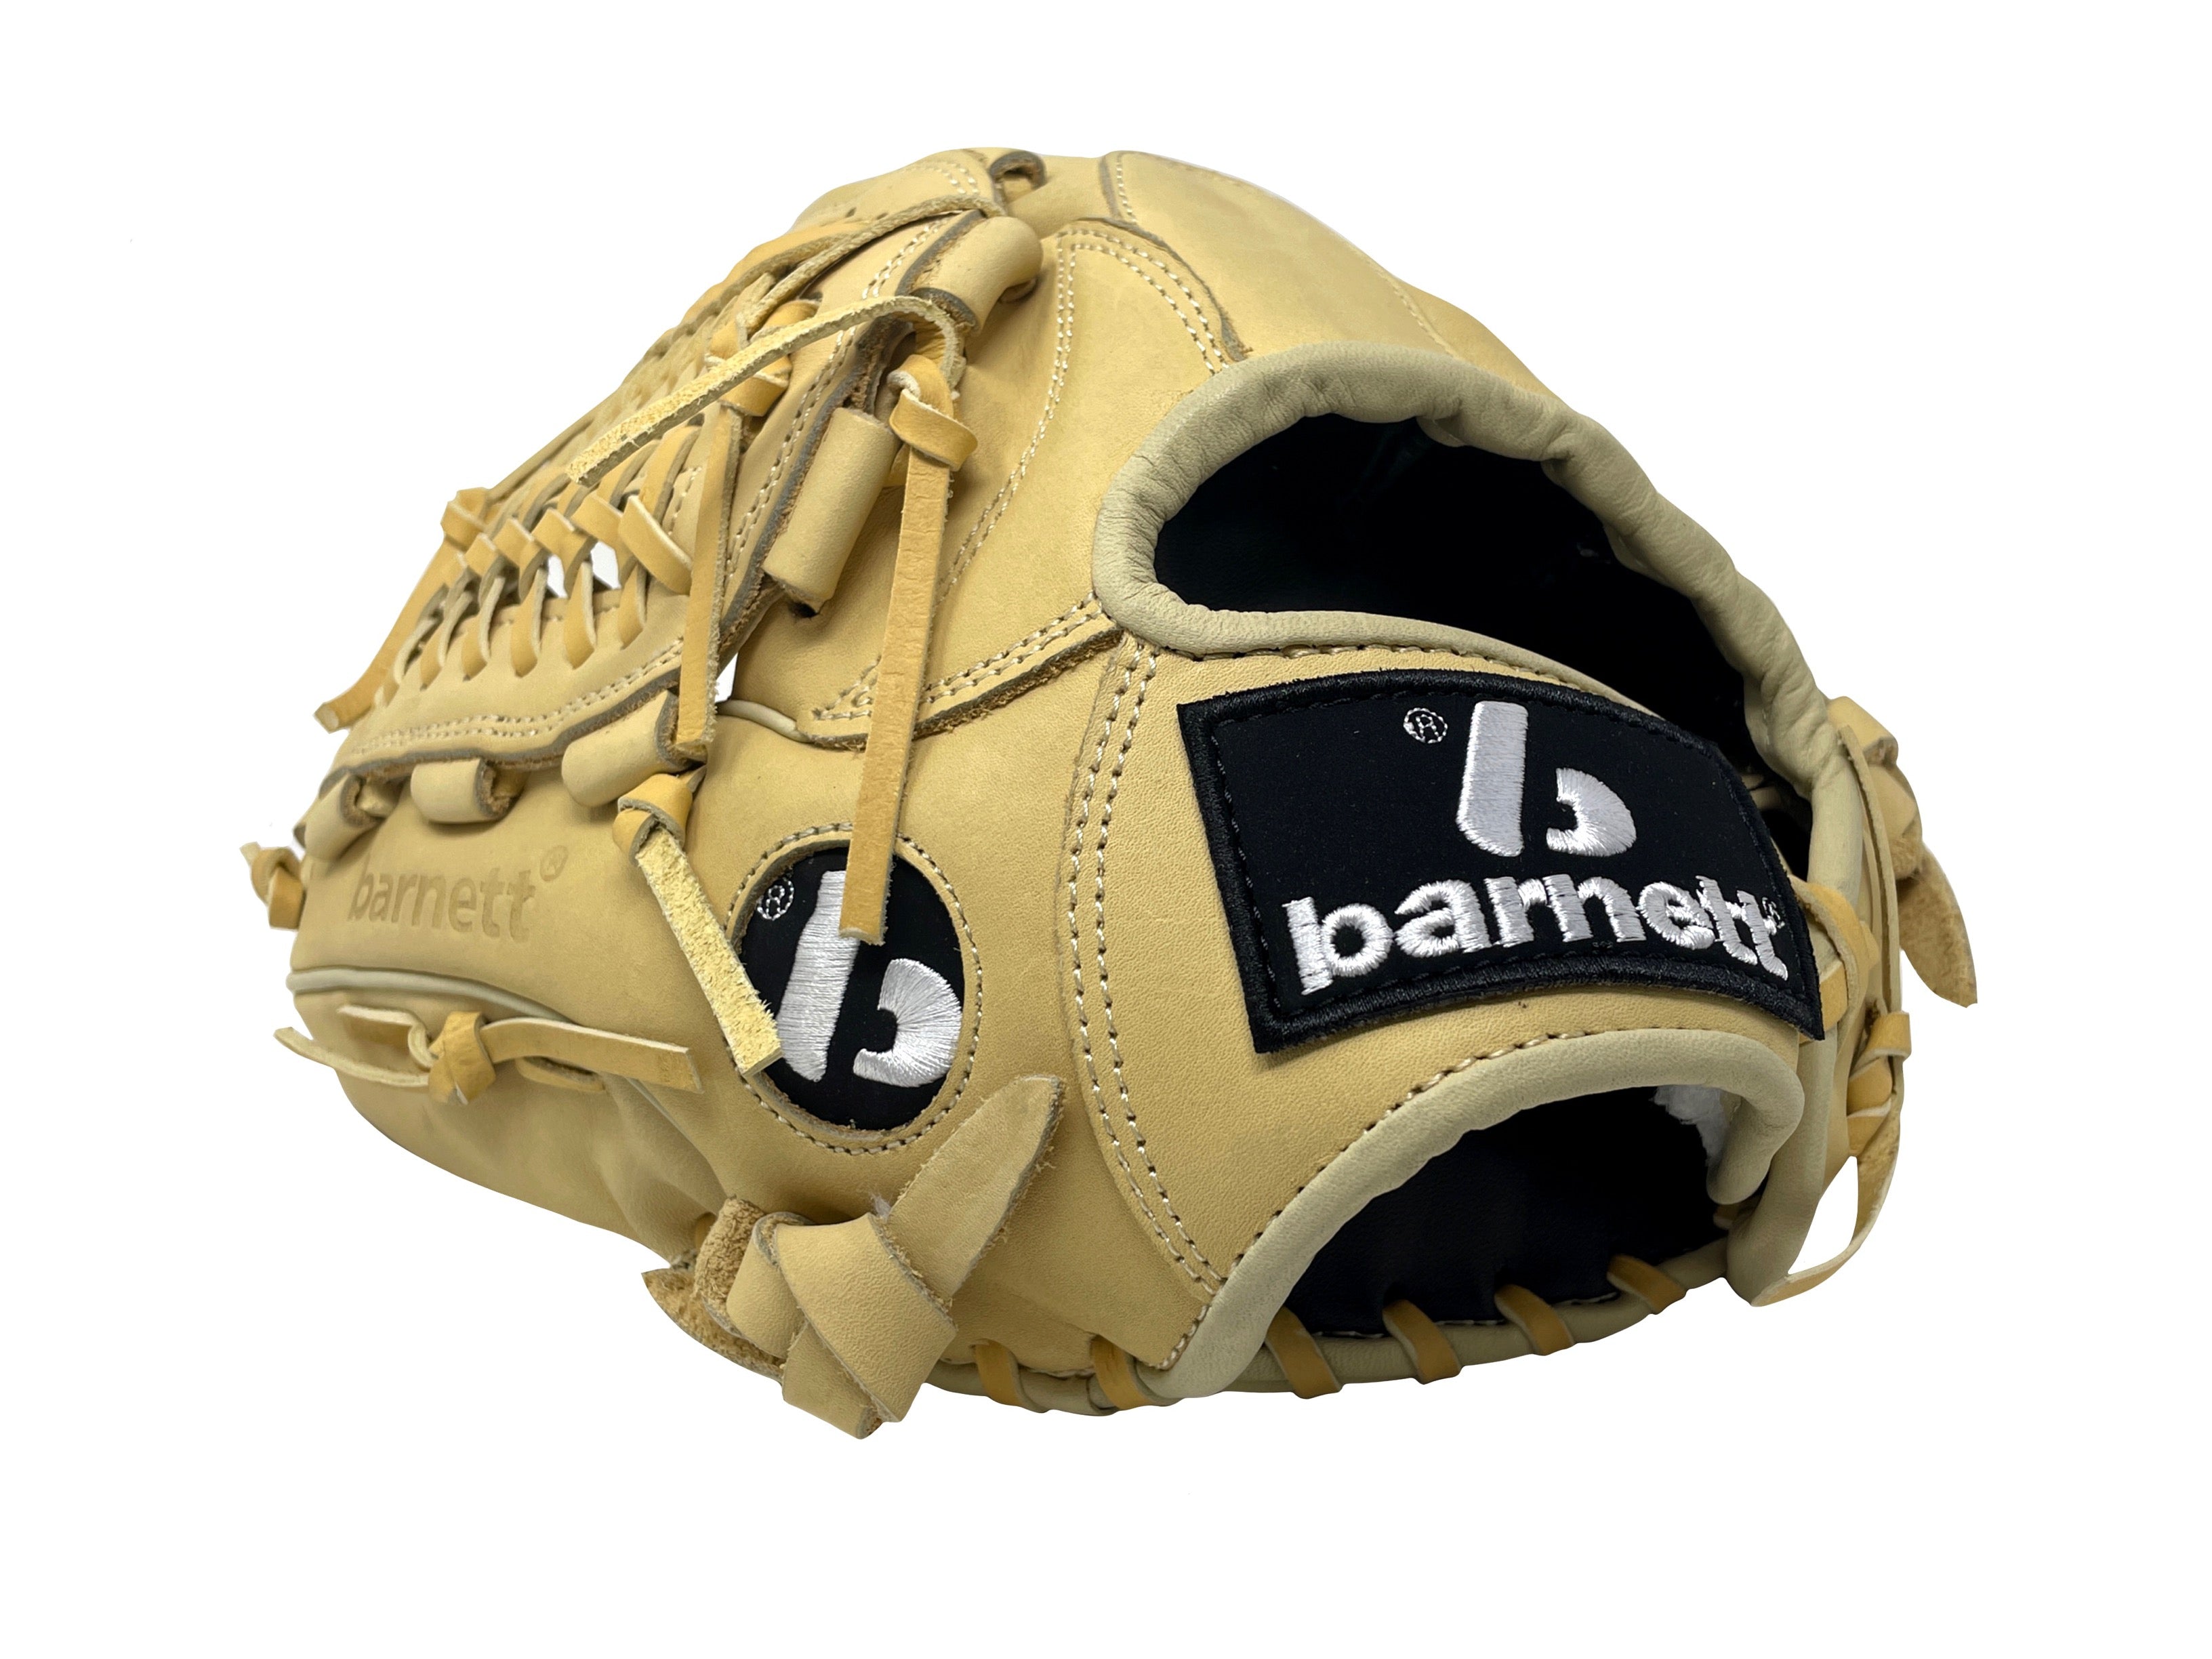 FL-120 Baseball glove, leather, infield/outfield/pitcher, 12/